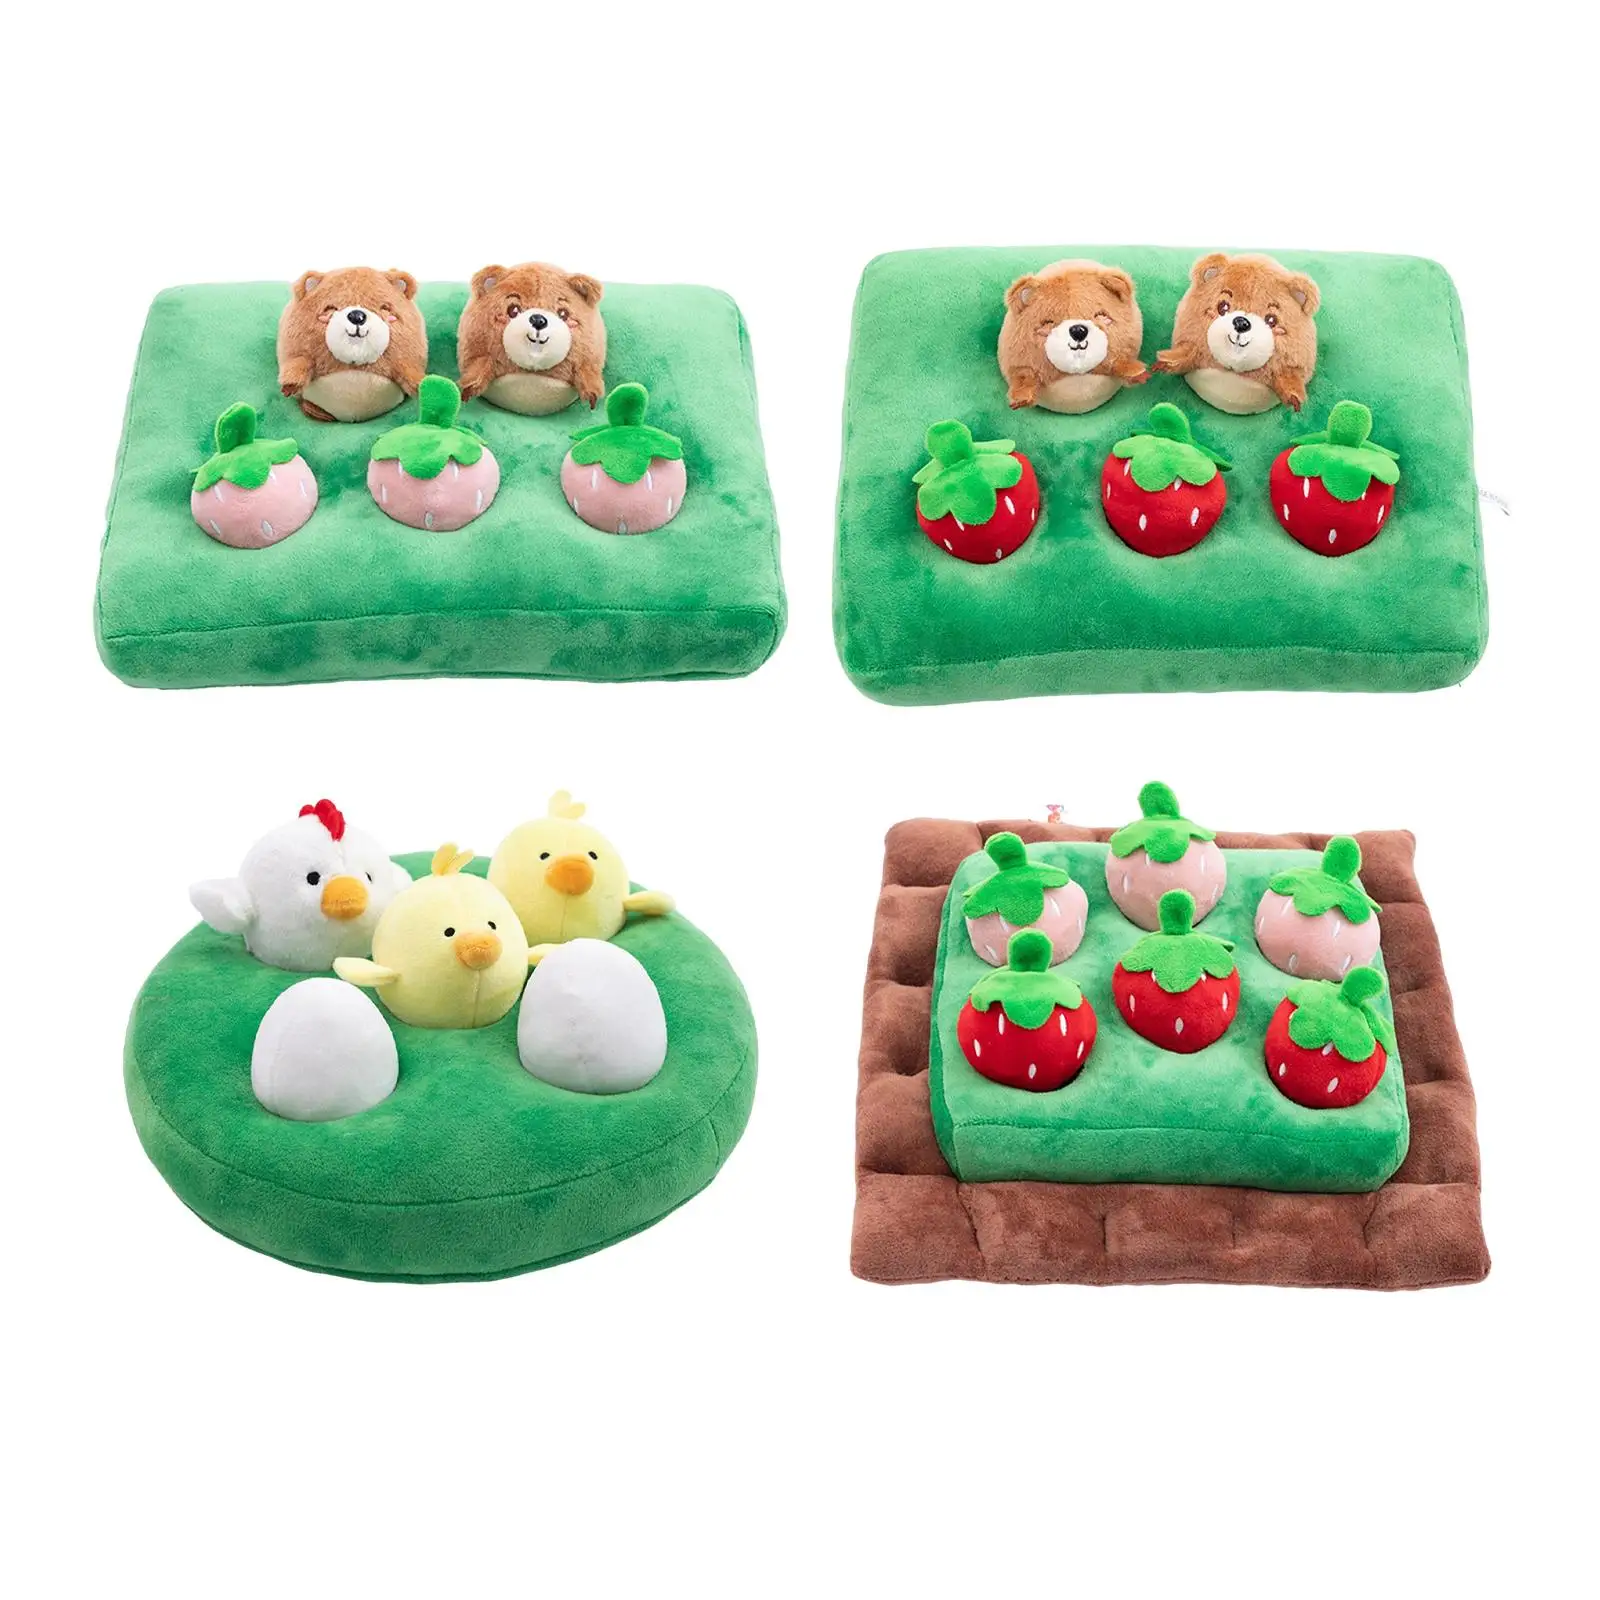 Puzzle Toys Playset Games Educational Learning Toys Family Decorations Sorting Developmental Plush Toys for Great Gift Children